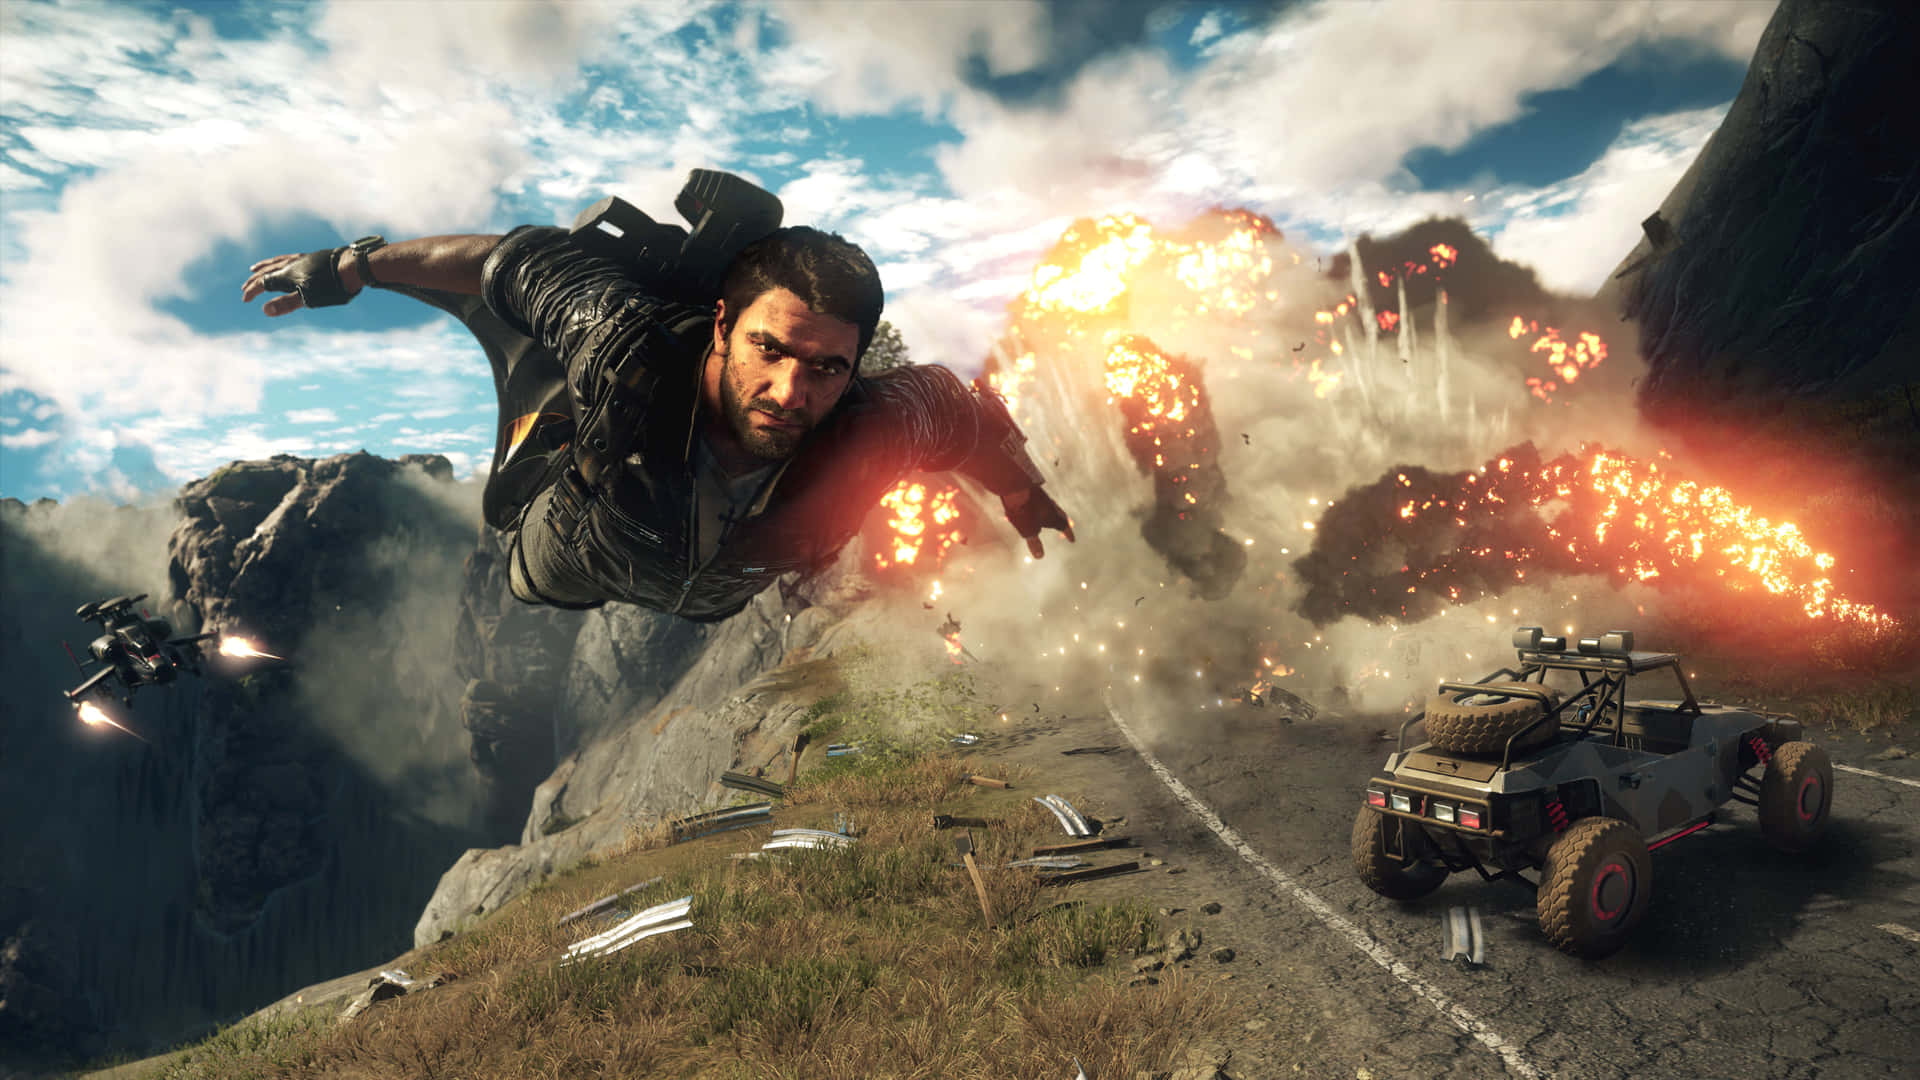 Get Adrenaline Rush with Best Just Cause 4!